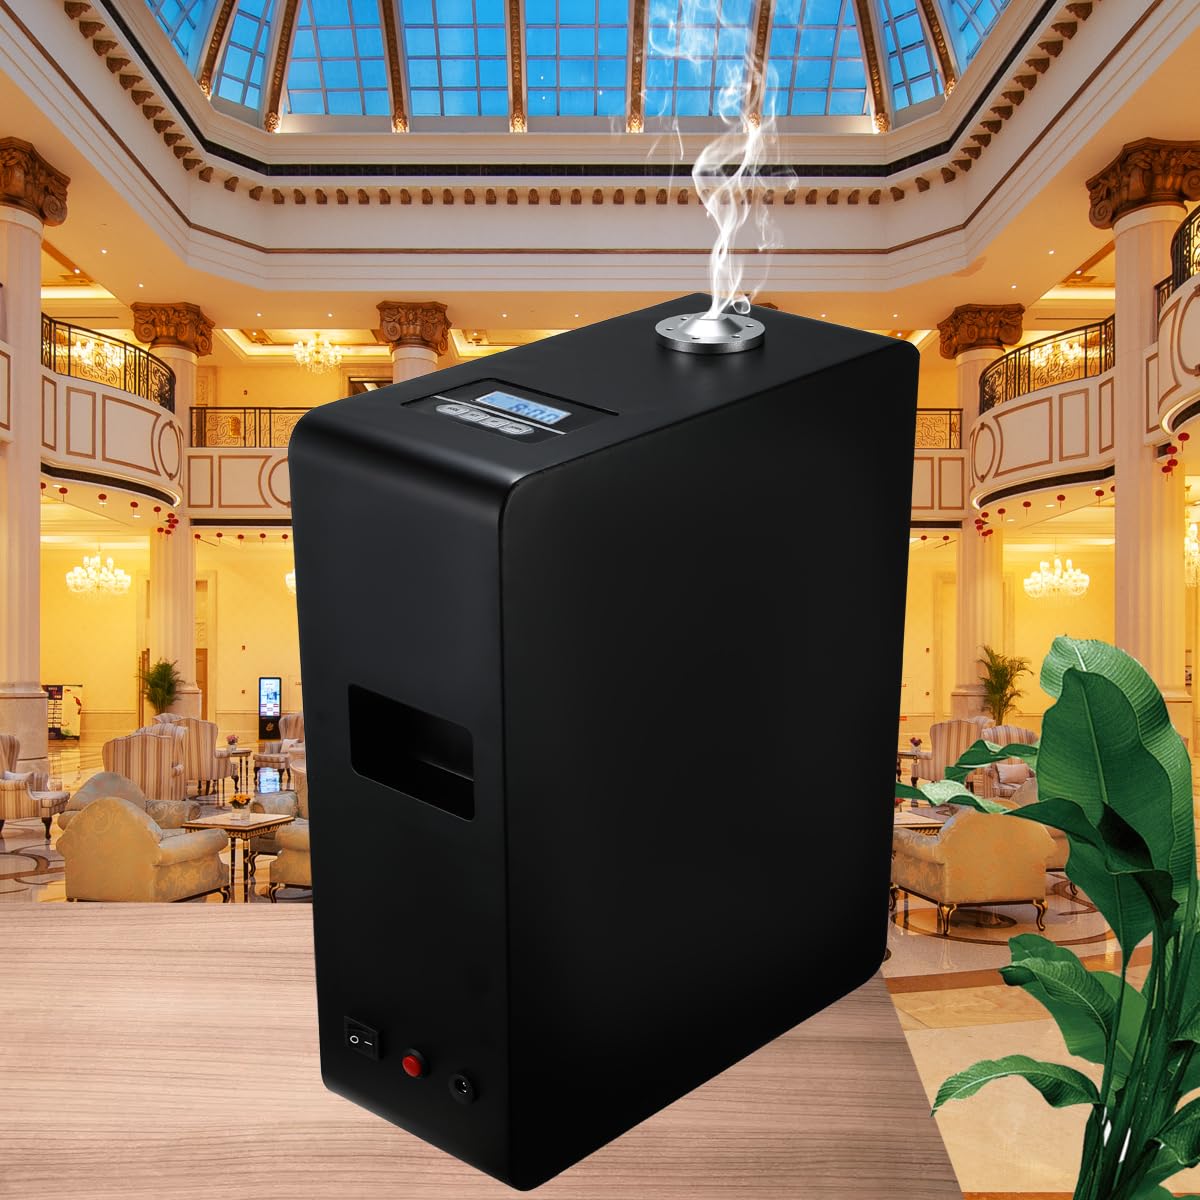 Kevinleo Scent Air Machine for 3,500-7,500 Sq.ft Area,Waterless,500ml Refill Bottle,Last Long,Cold Air Technology,Powerful Scent,HVAC Scent Diffuser Air Freshener for Hotel Office Business SPA